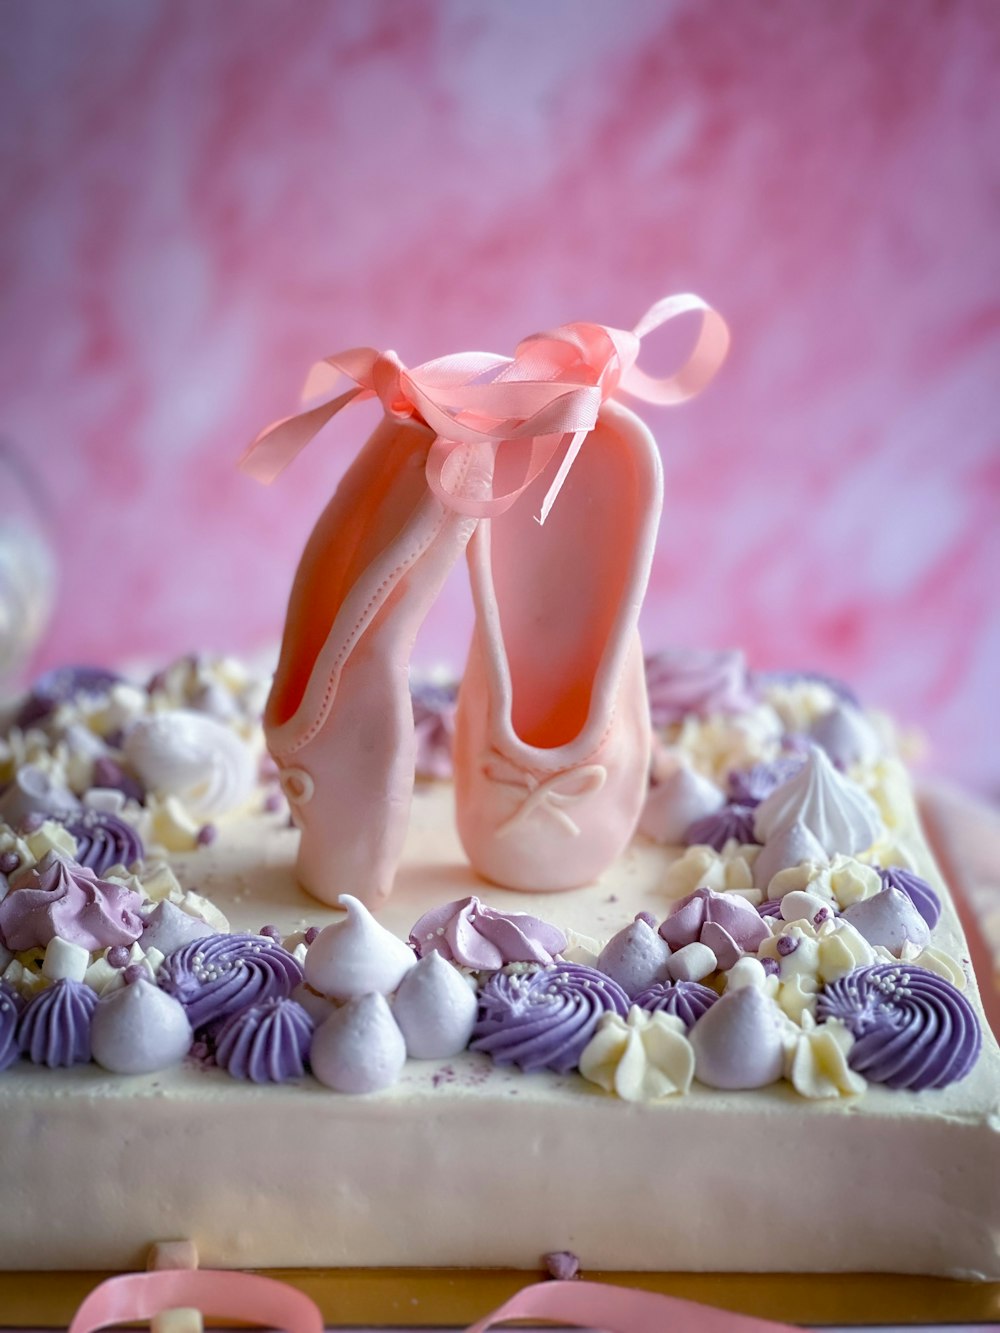 a cake decorated with a pair of ballet shoes and seashells